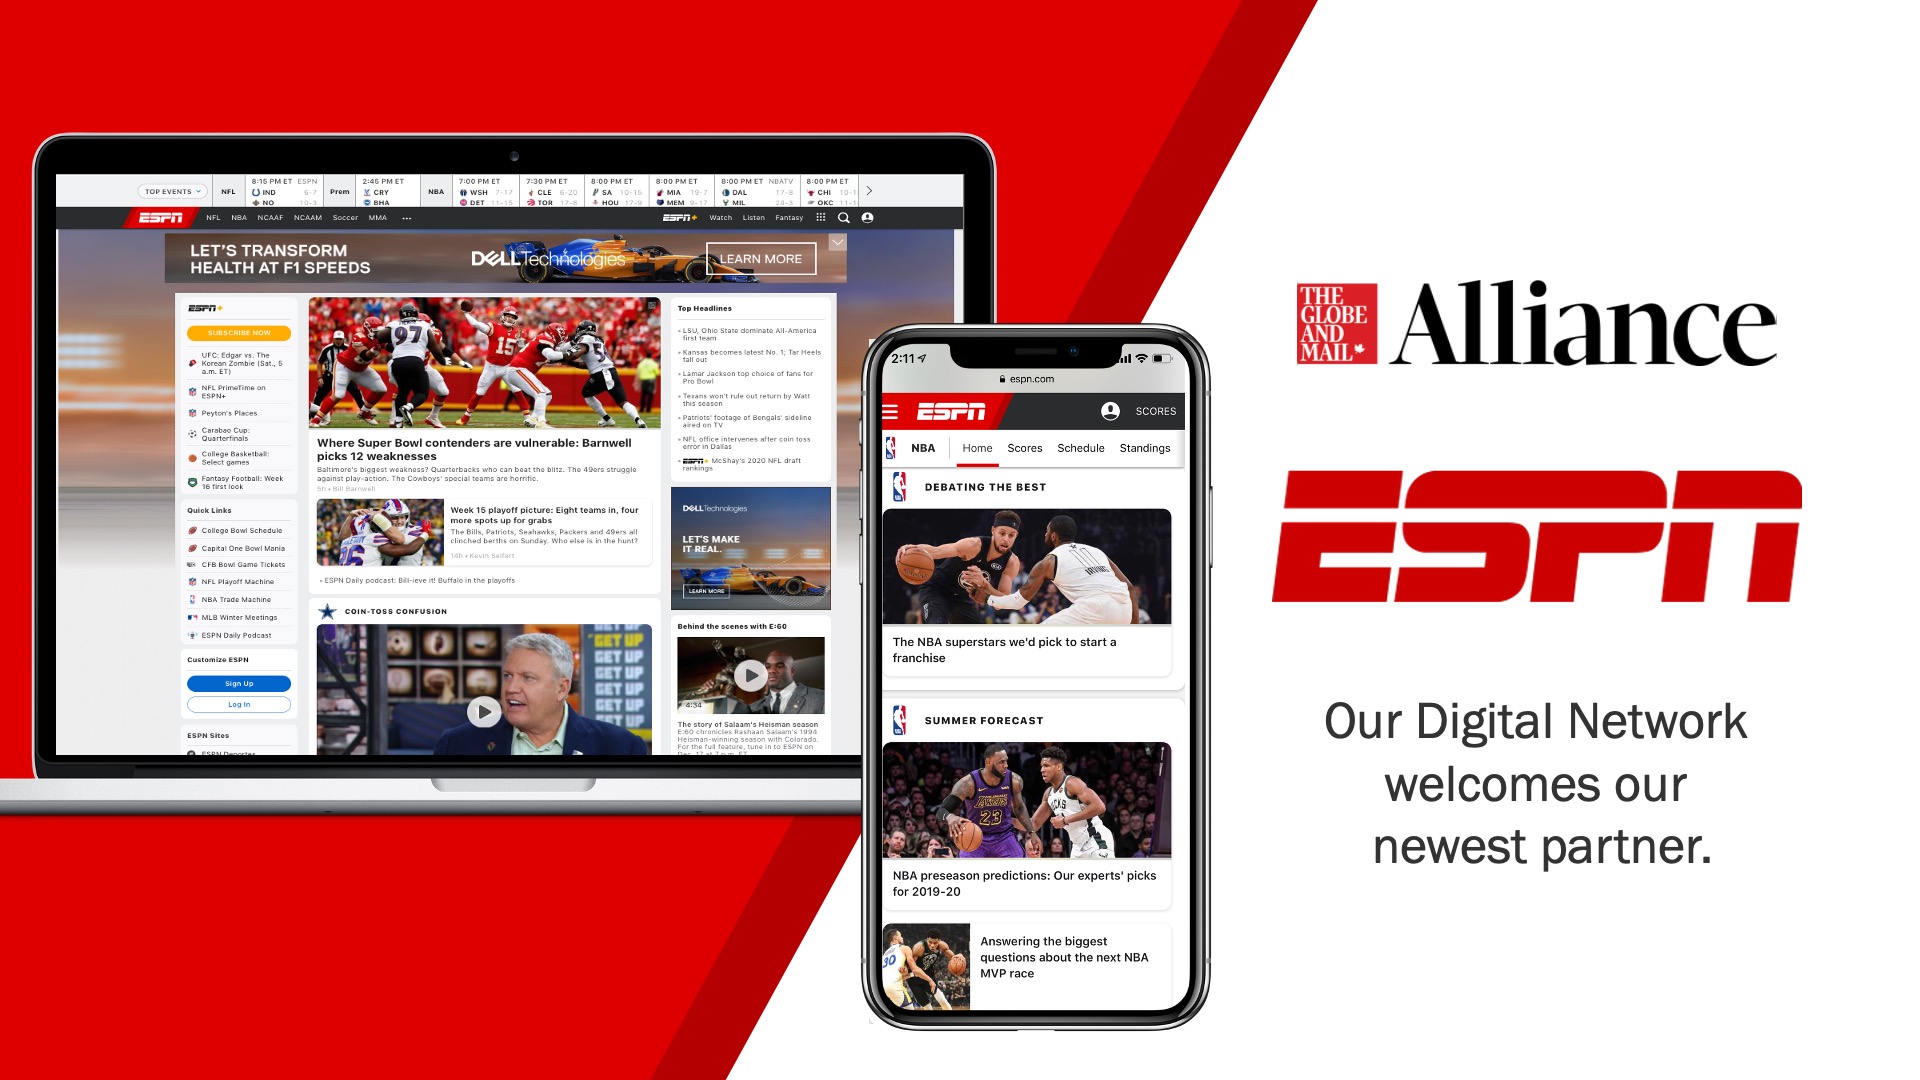 Globe Alliance welcomes our newest partner, ESPN.